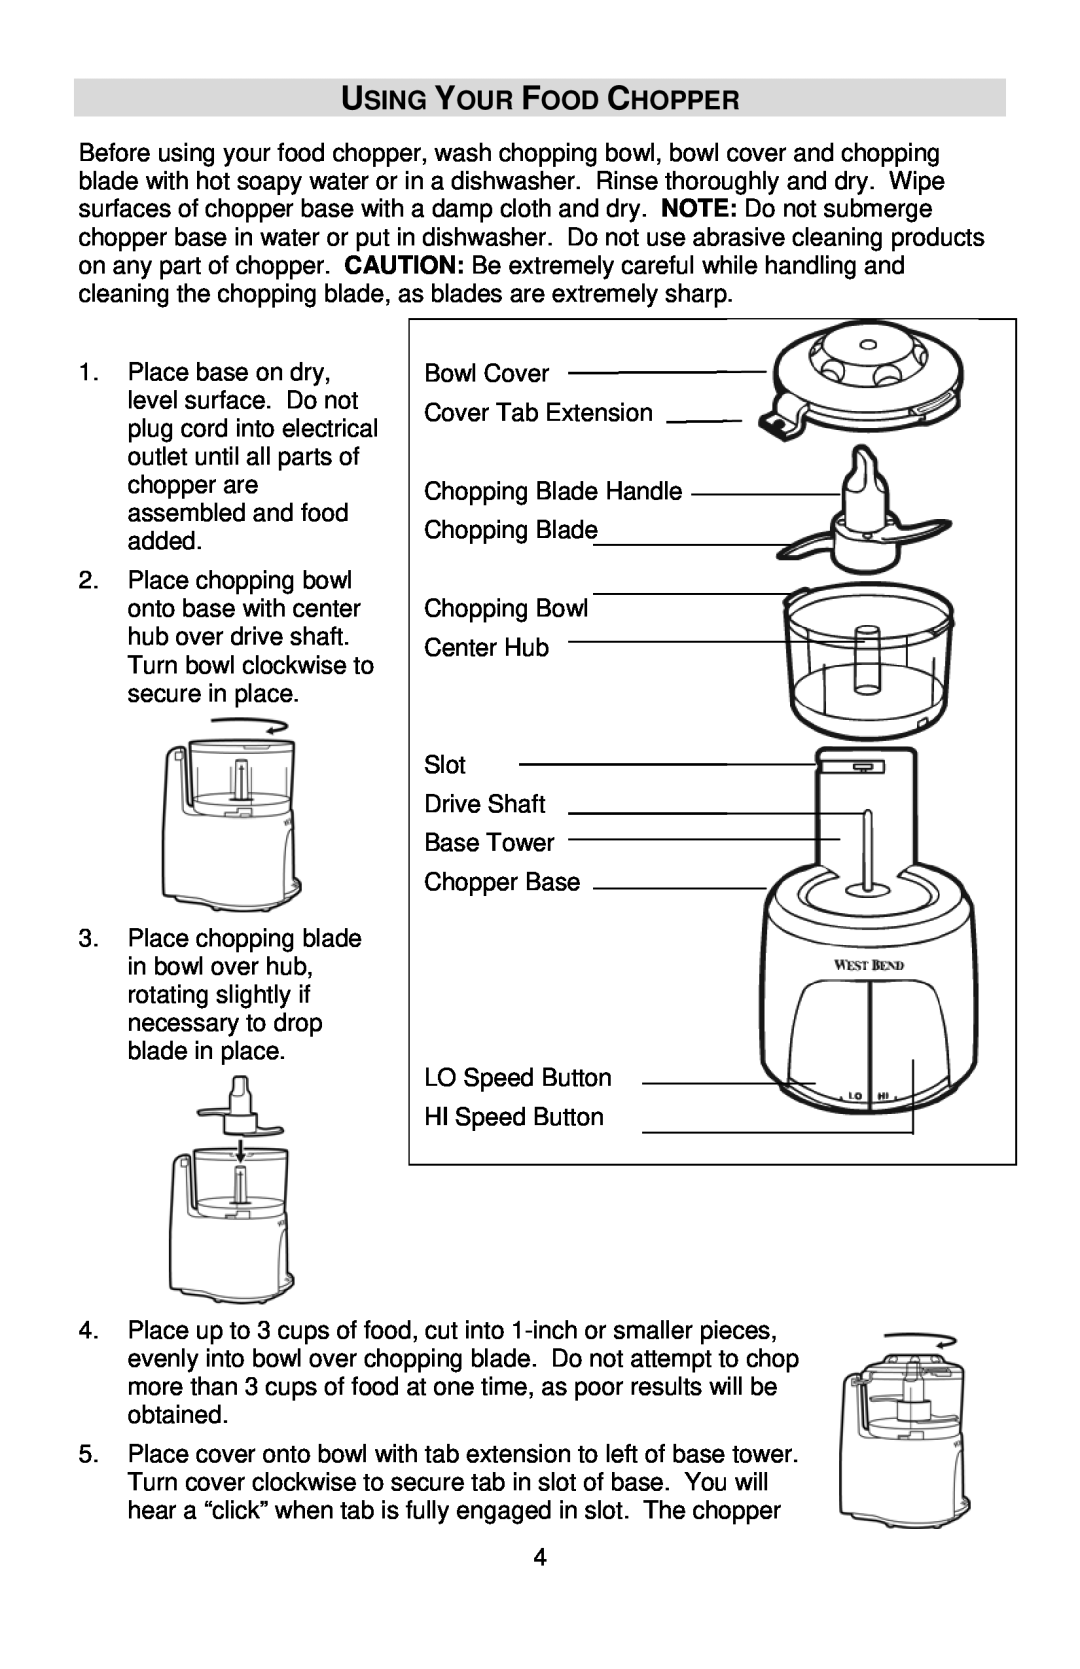 West Bend L5685 instruction manual Using Your Food Chopper 